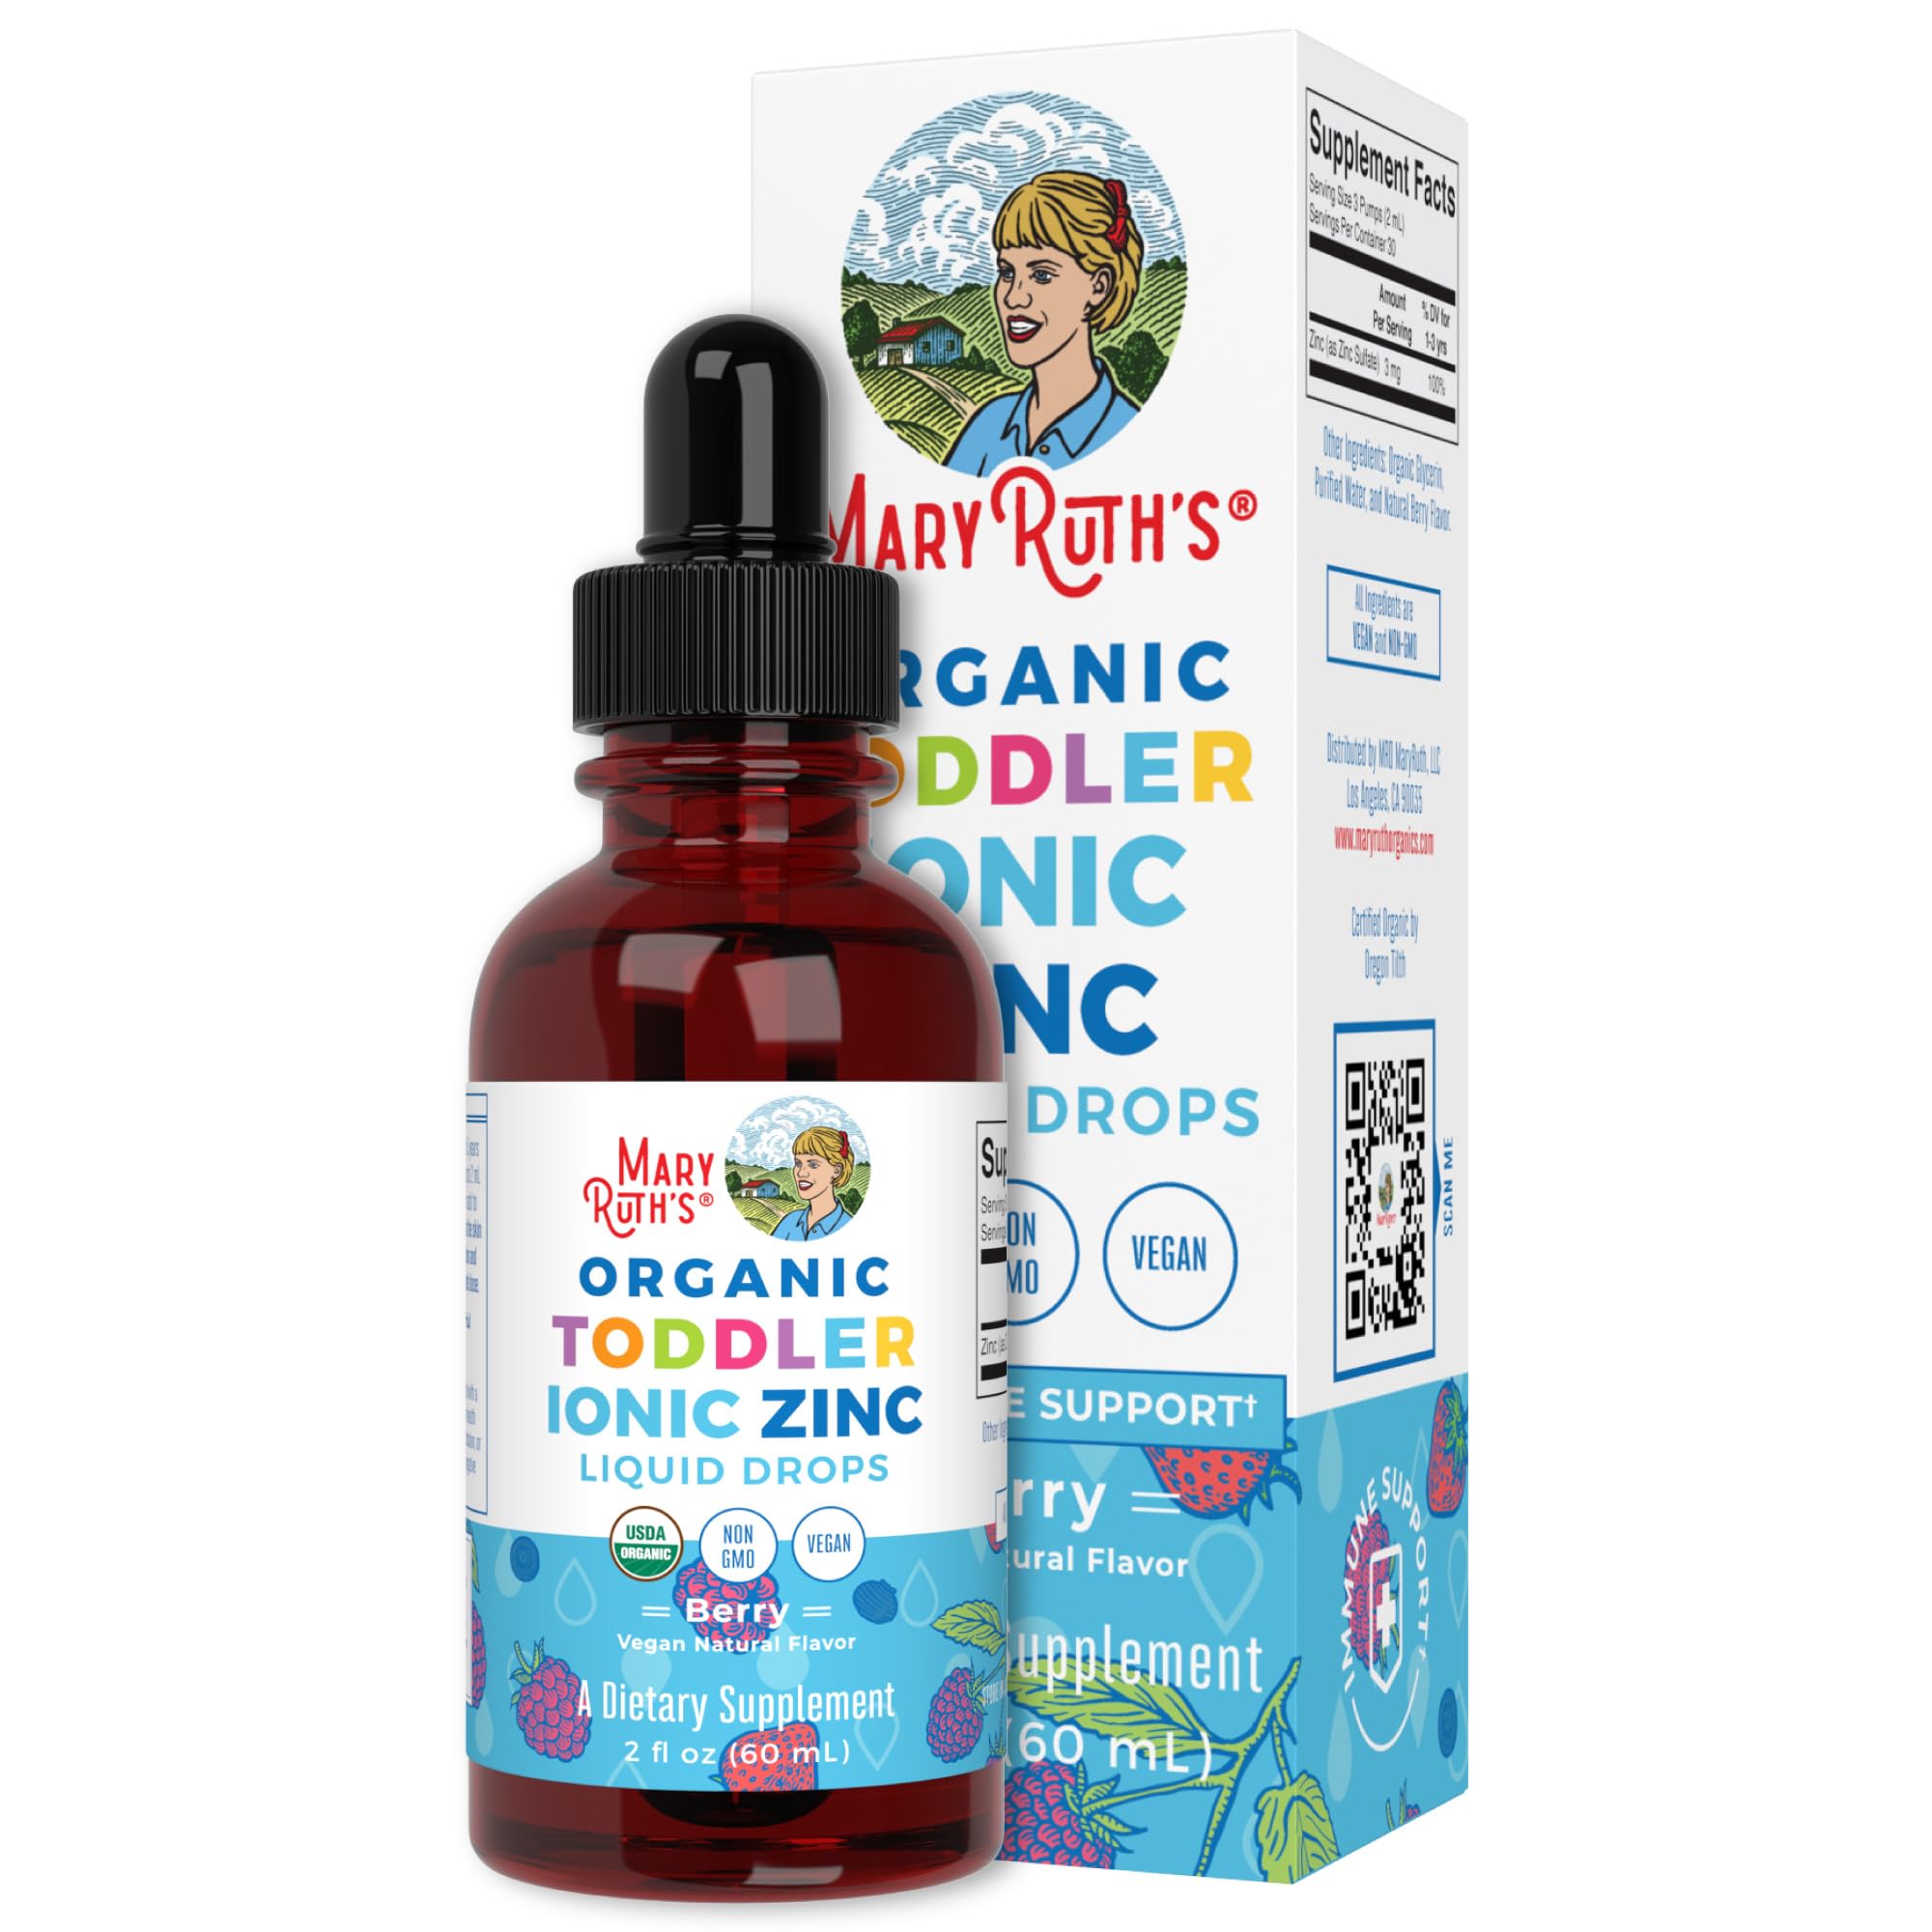 MaryRuth's Toddler Liquid Ionic Zinc Sulfate with Organic Glycerin for Immune Support | Vegan | Formulated for Ages 1-3 | 1 Month Supply | 2 Fl Oz